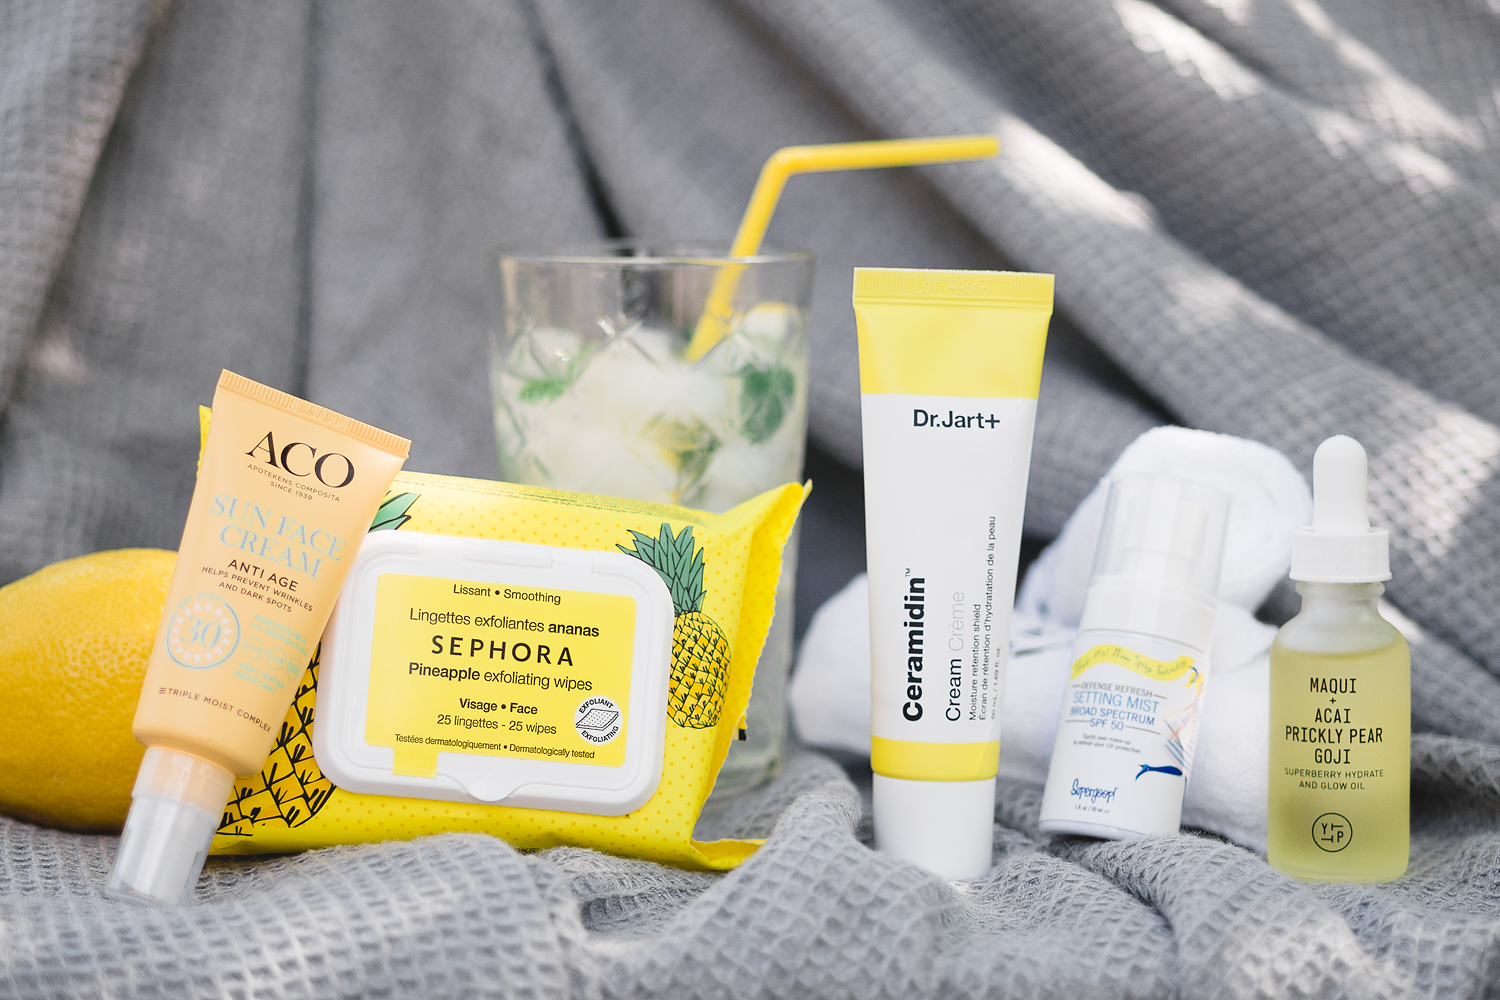 lat sommarrutin youth to the people aco sephora dr. jart+ supergoop